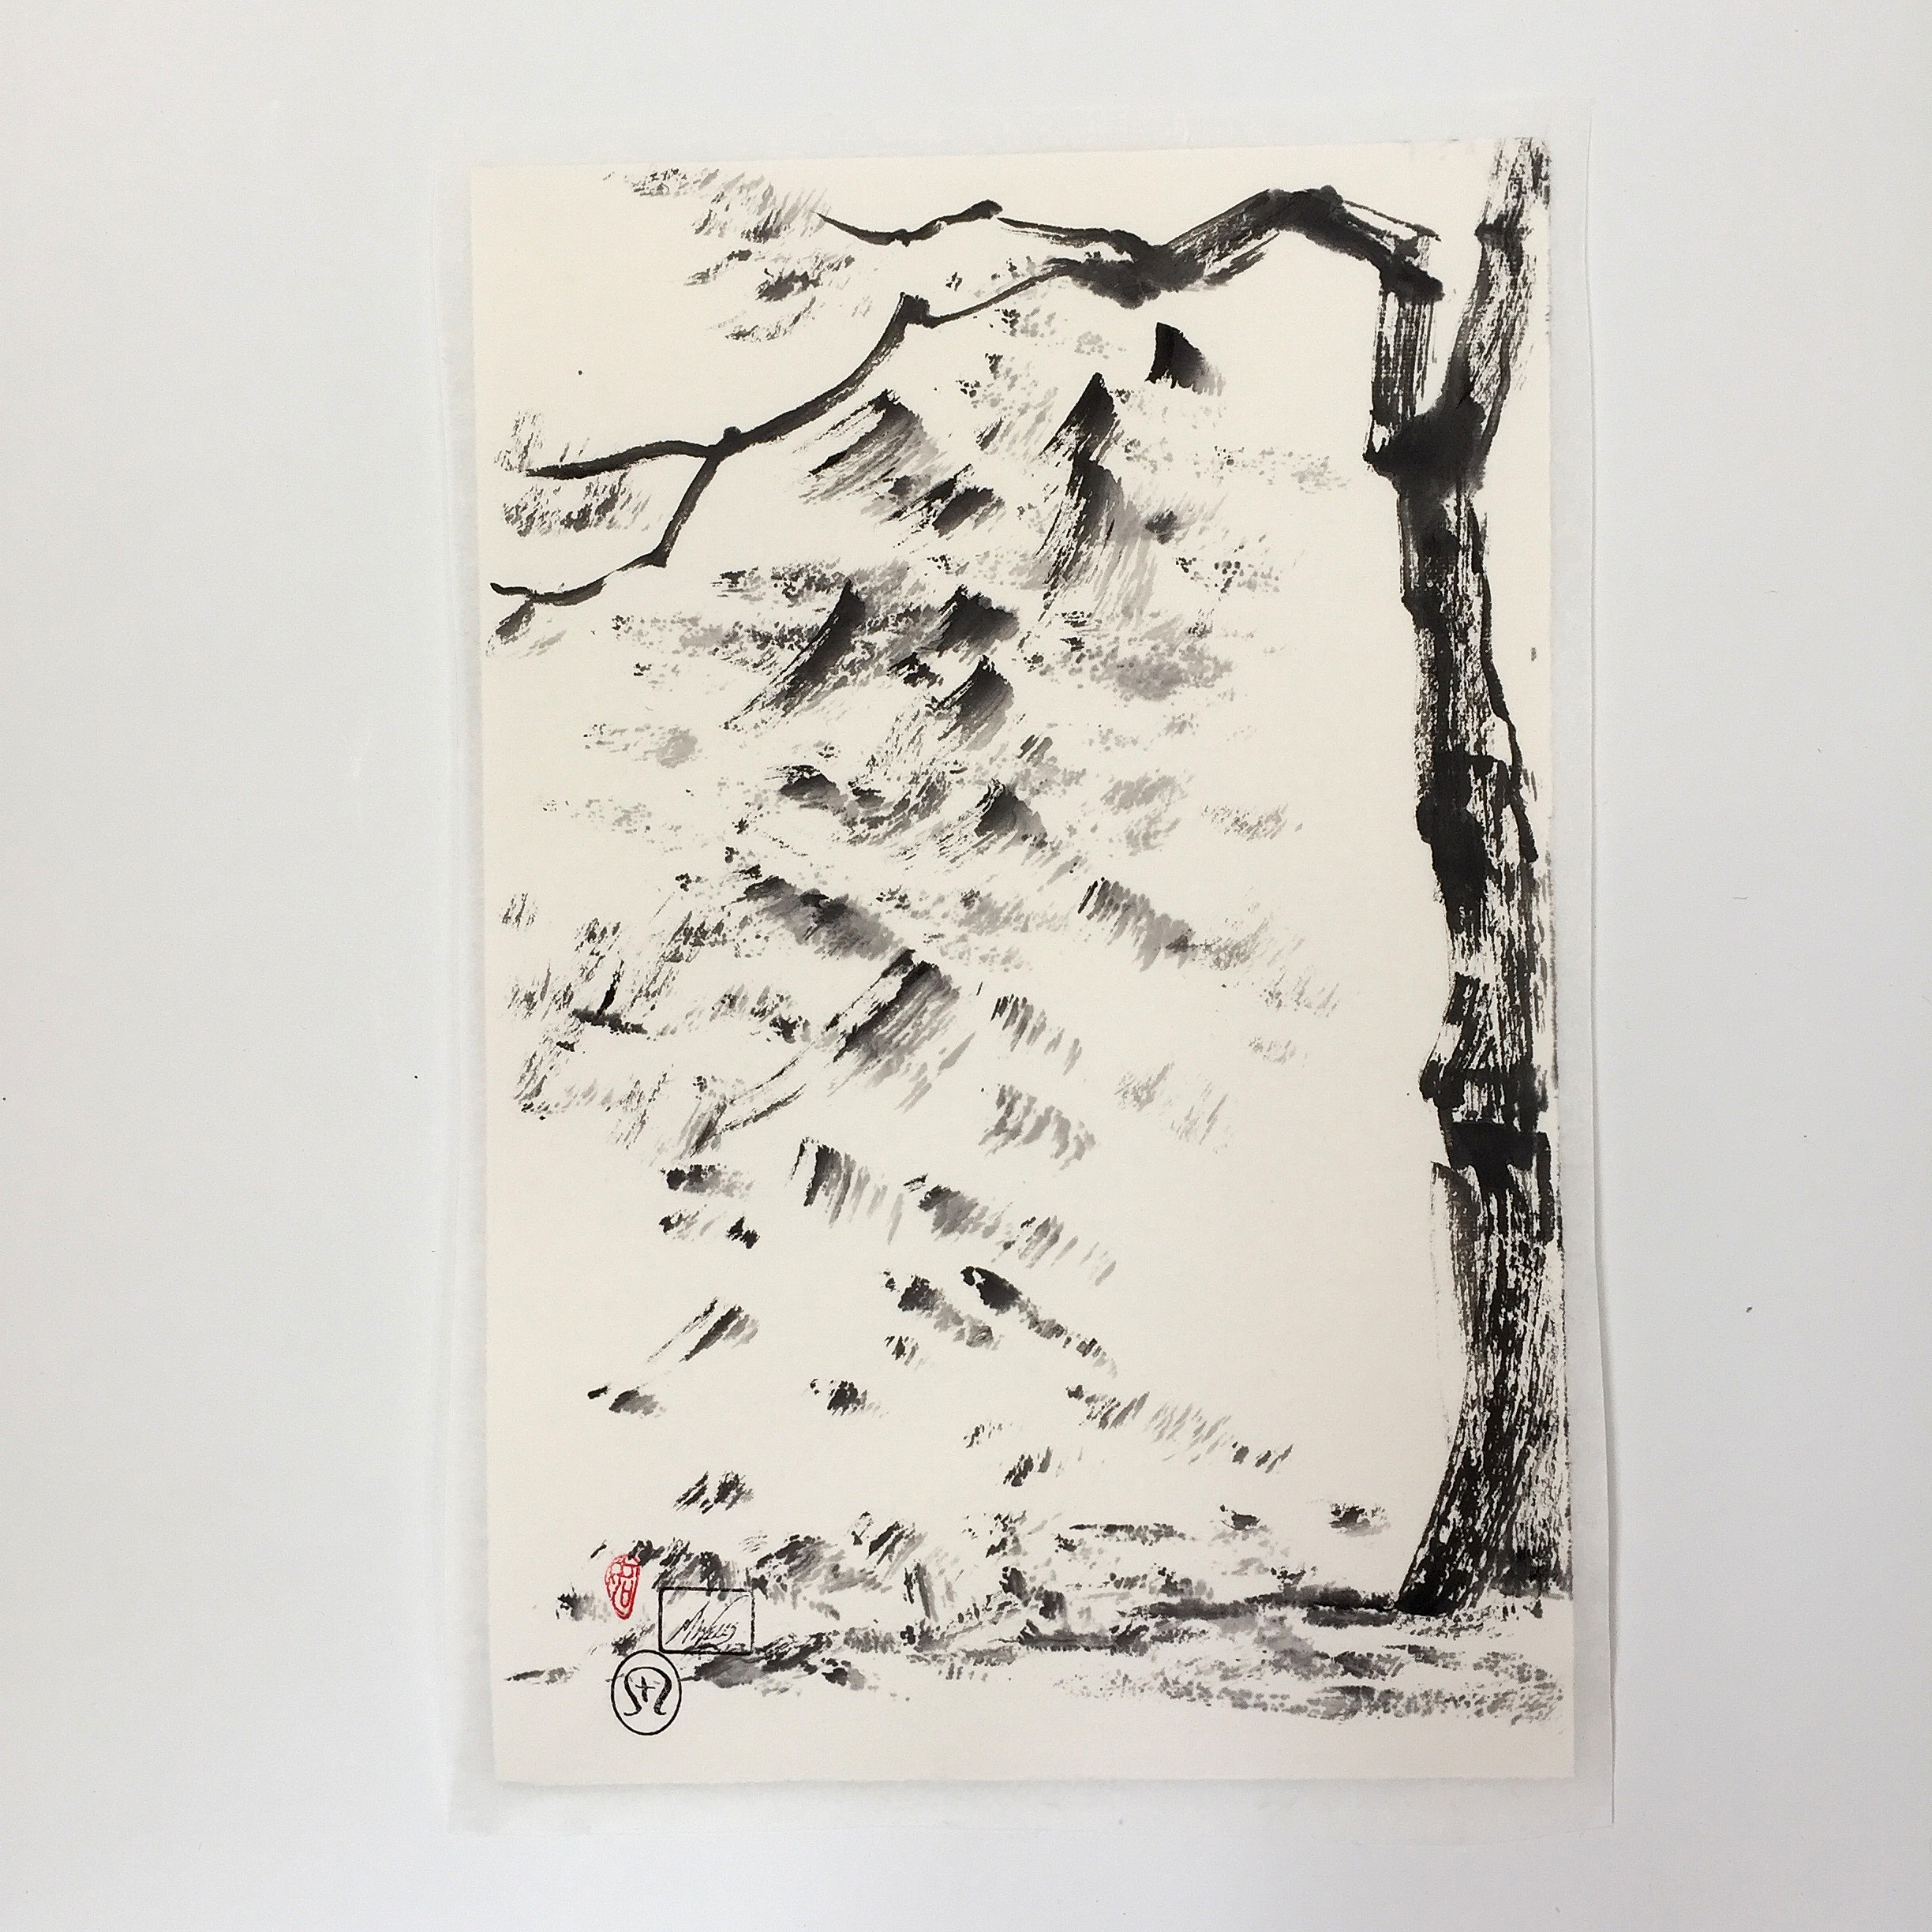 "The Blossoms Keep Falling" 188S by Marilyn Wells—14”x 18” on mulberry paper, mounted—$TBD" abstract sumi-e